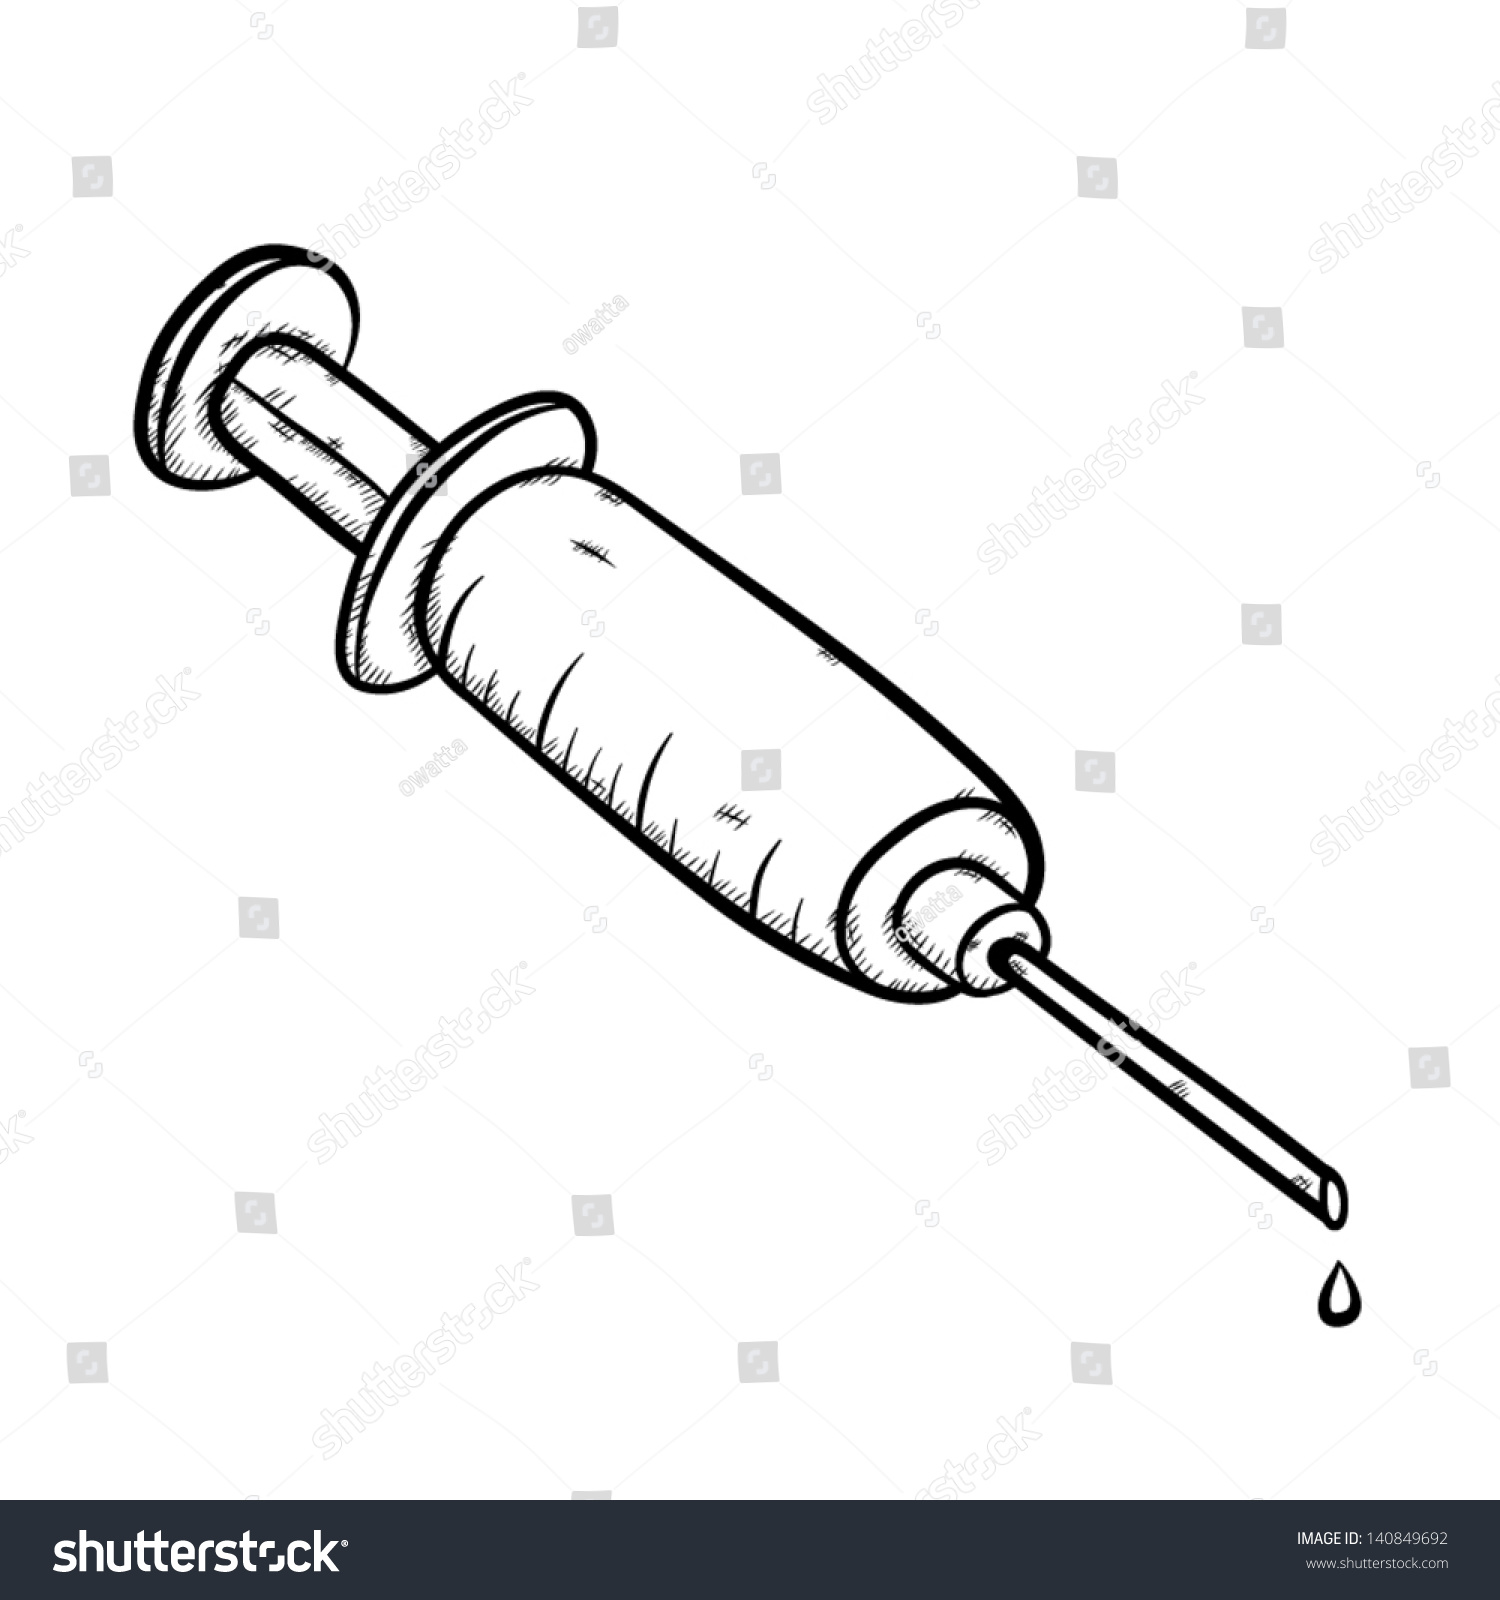 Drug Syringe Injecting And Drop Of Liquid / Cartoon Vector And ...